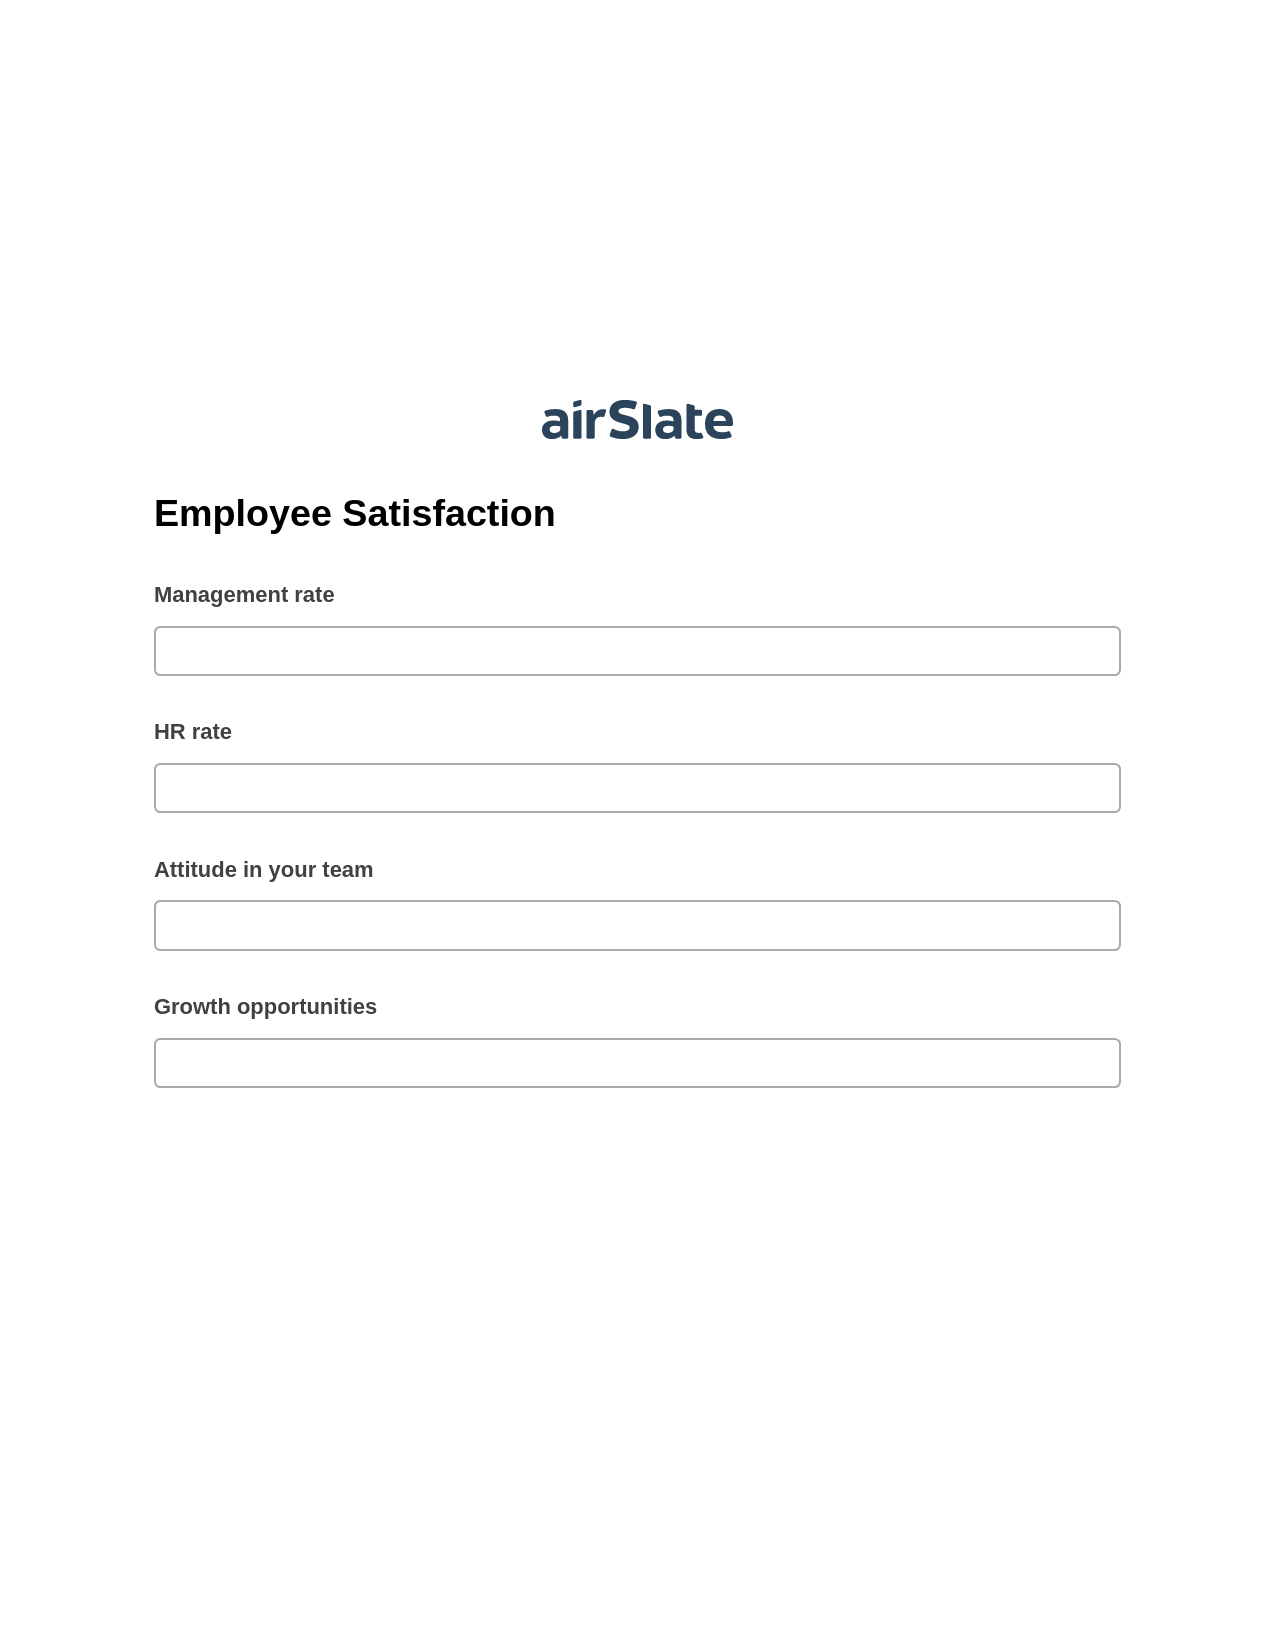 Employee Satisfaction Pre-fill from Salesforce Record Bot, Email Notification Bot, Export to Formstack Documents Bot